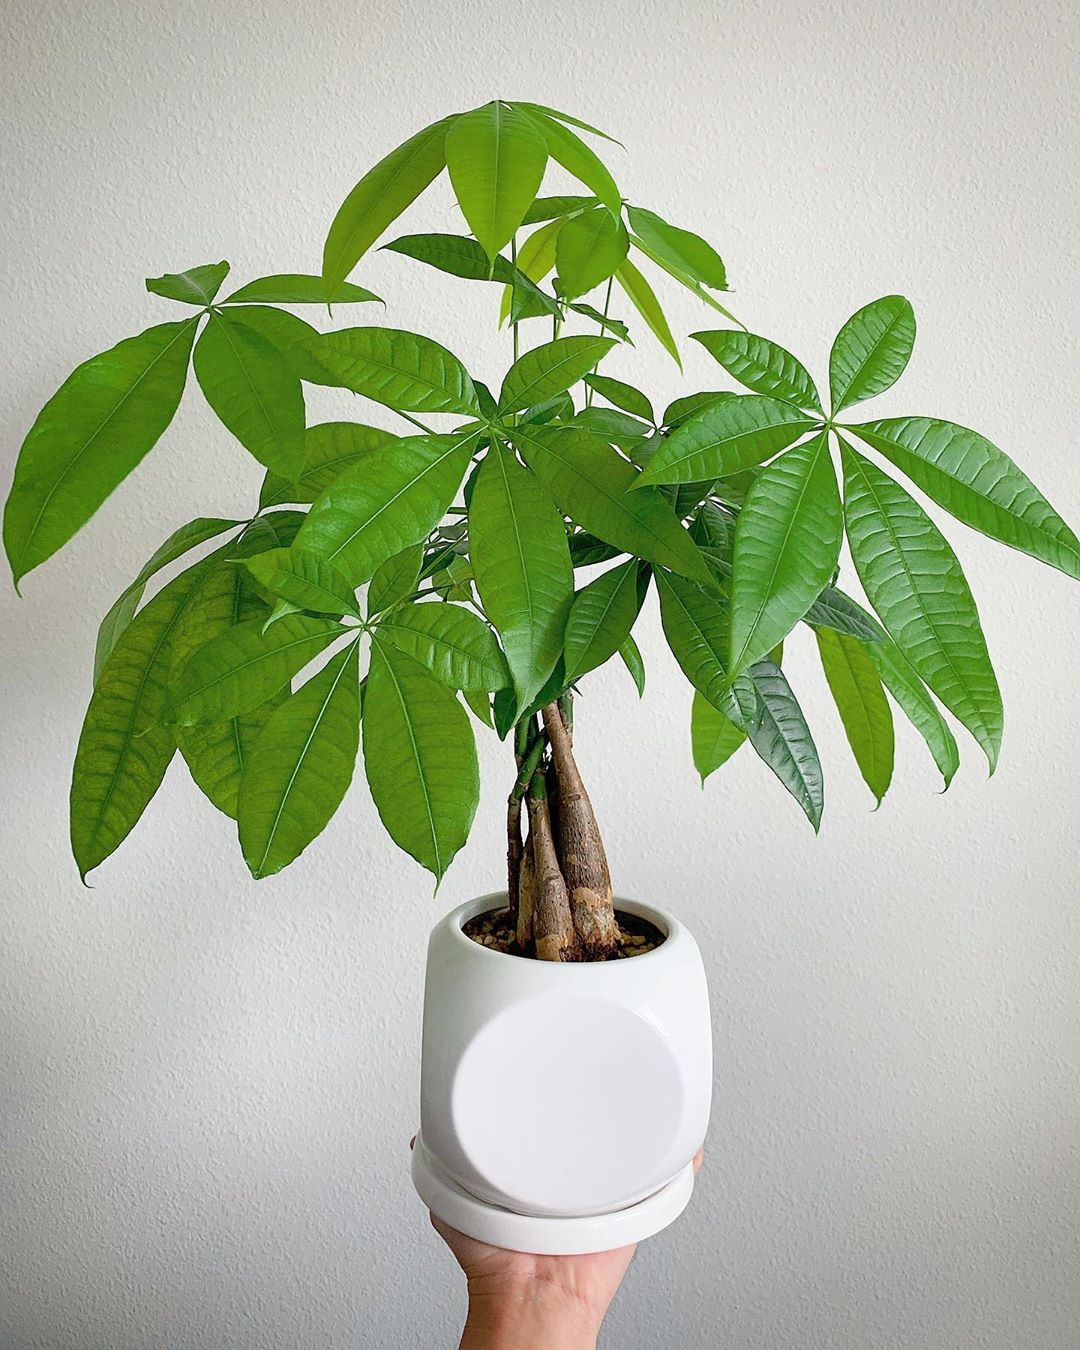 personalized money tree care: water, light, nutrients | greg app